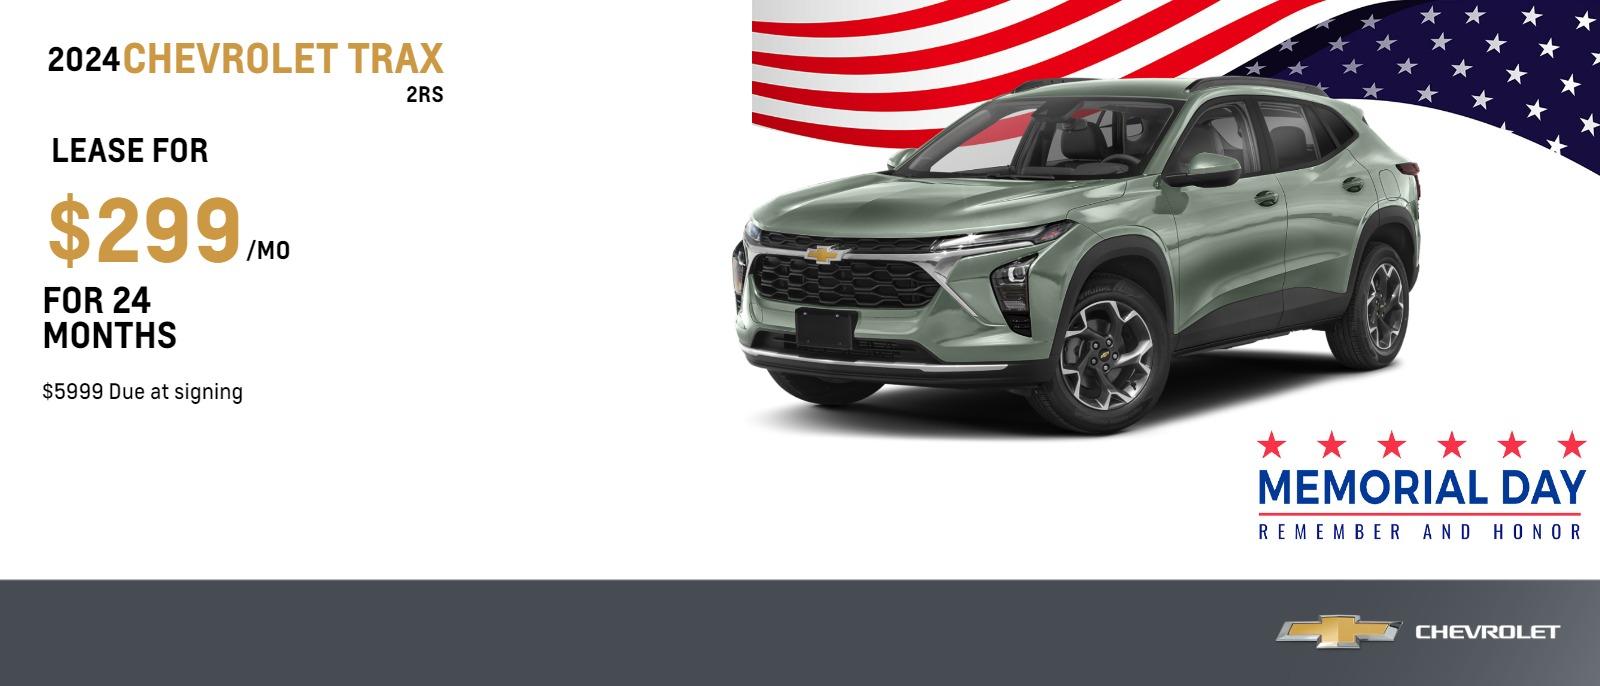 2024 Chevrolet Trax 2RS
$299 Month Lease | 24 Months | $5999 Due at signing